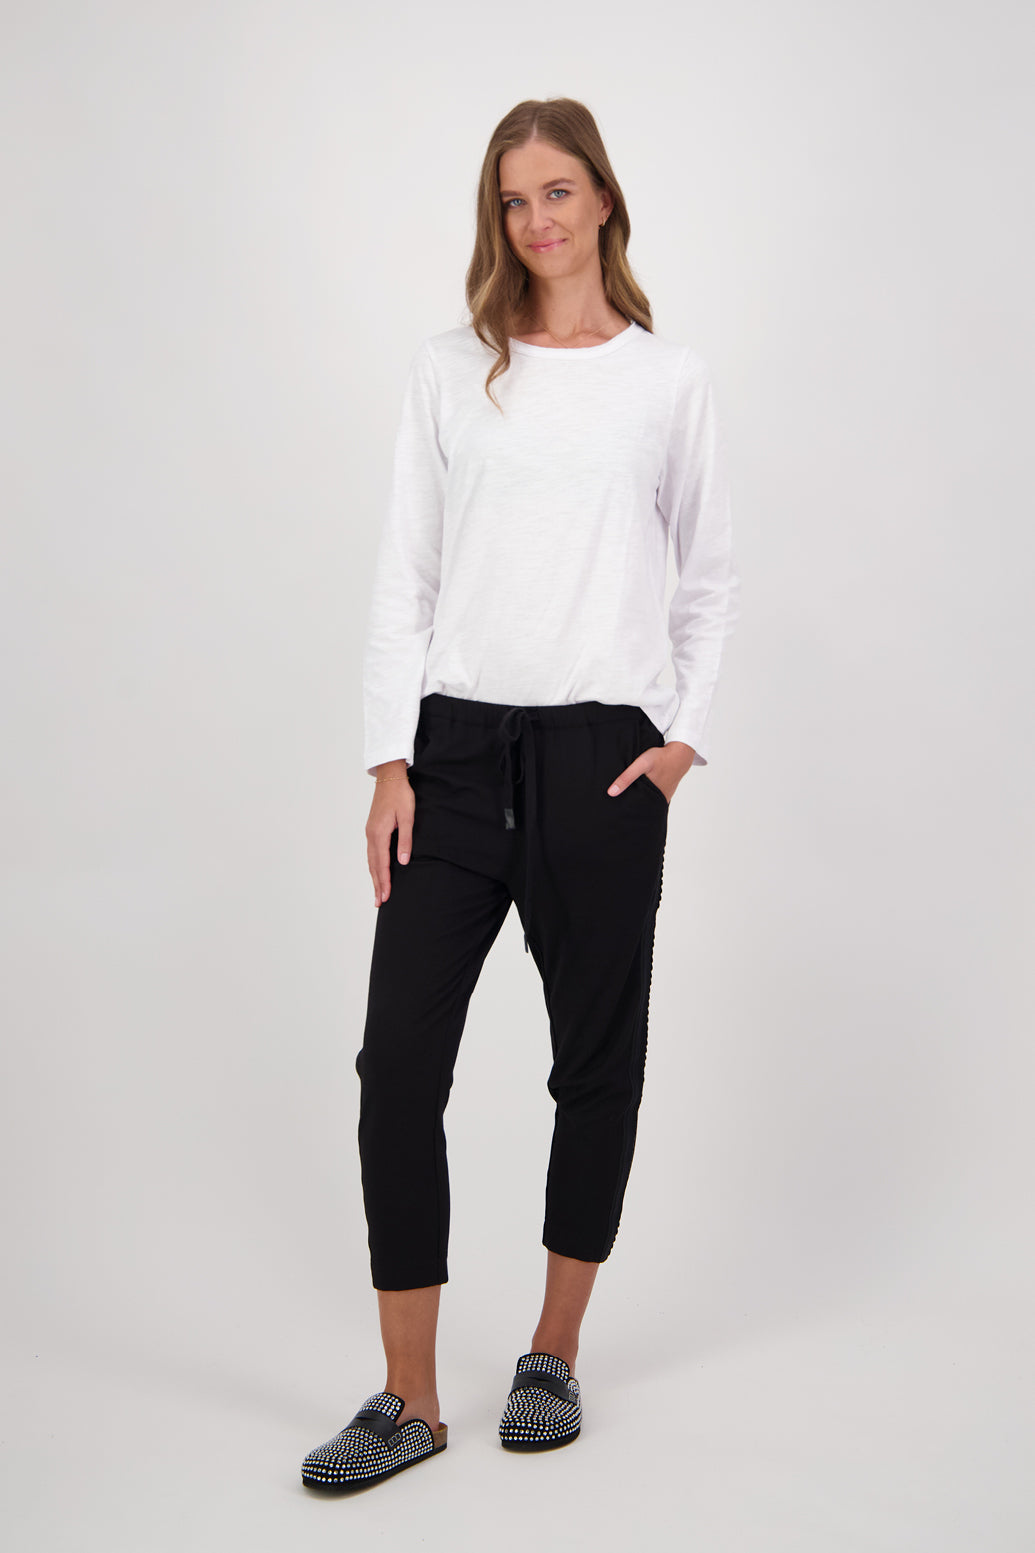 Clementine Black Ankle Pant/Trousers